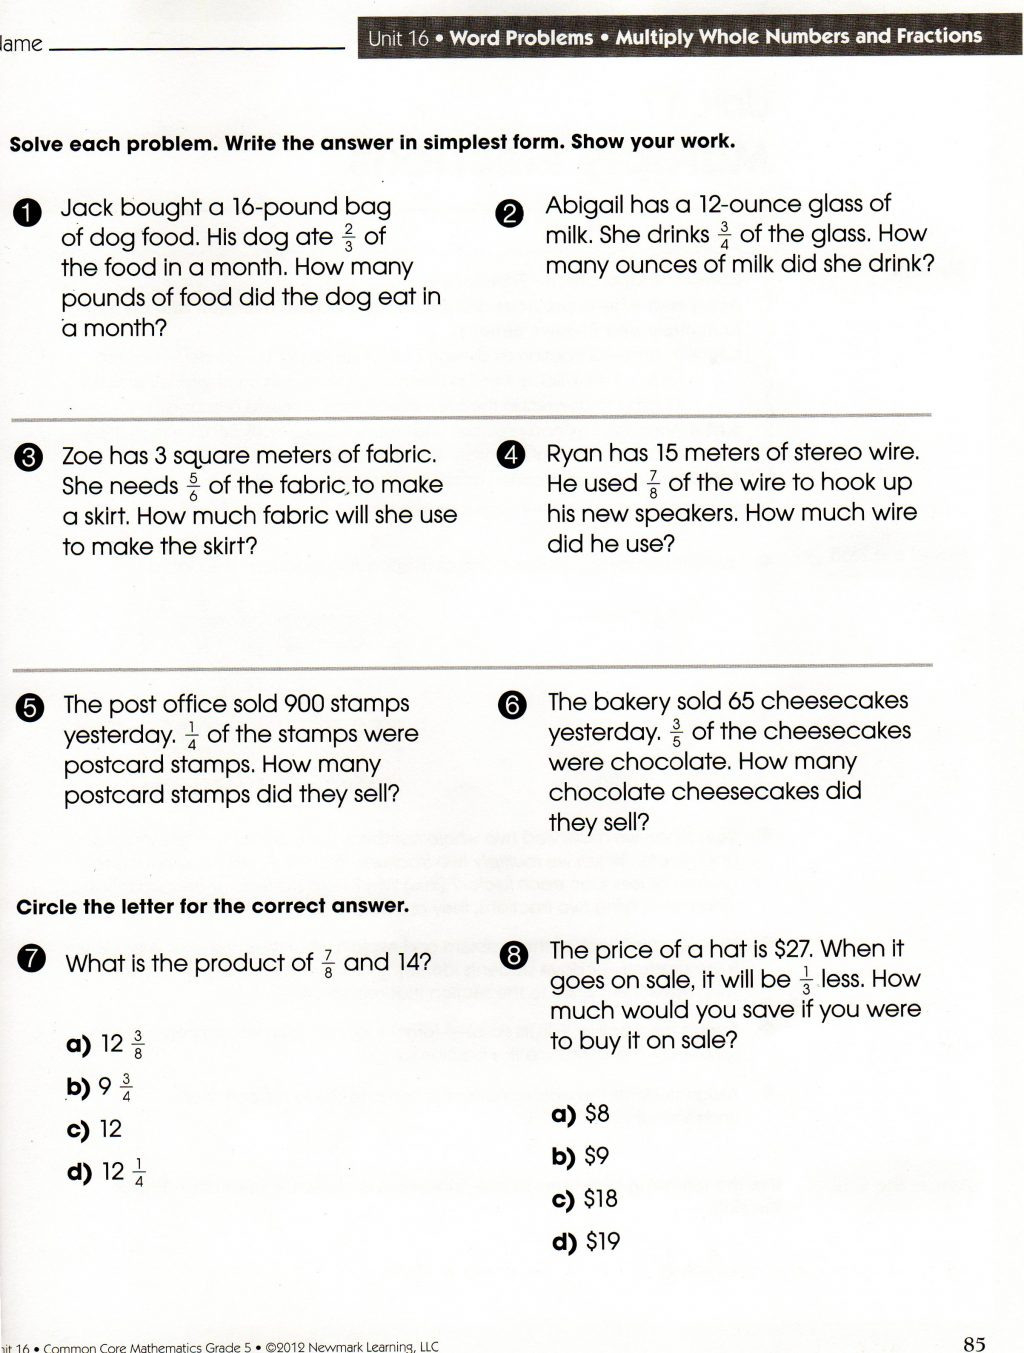 problem solving involving multiplication and division of fractions worksheet